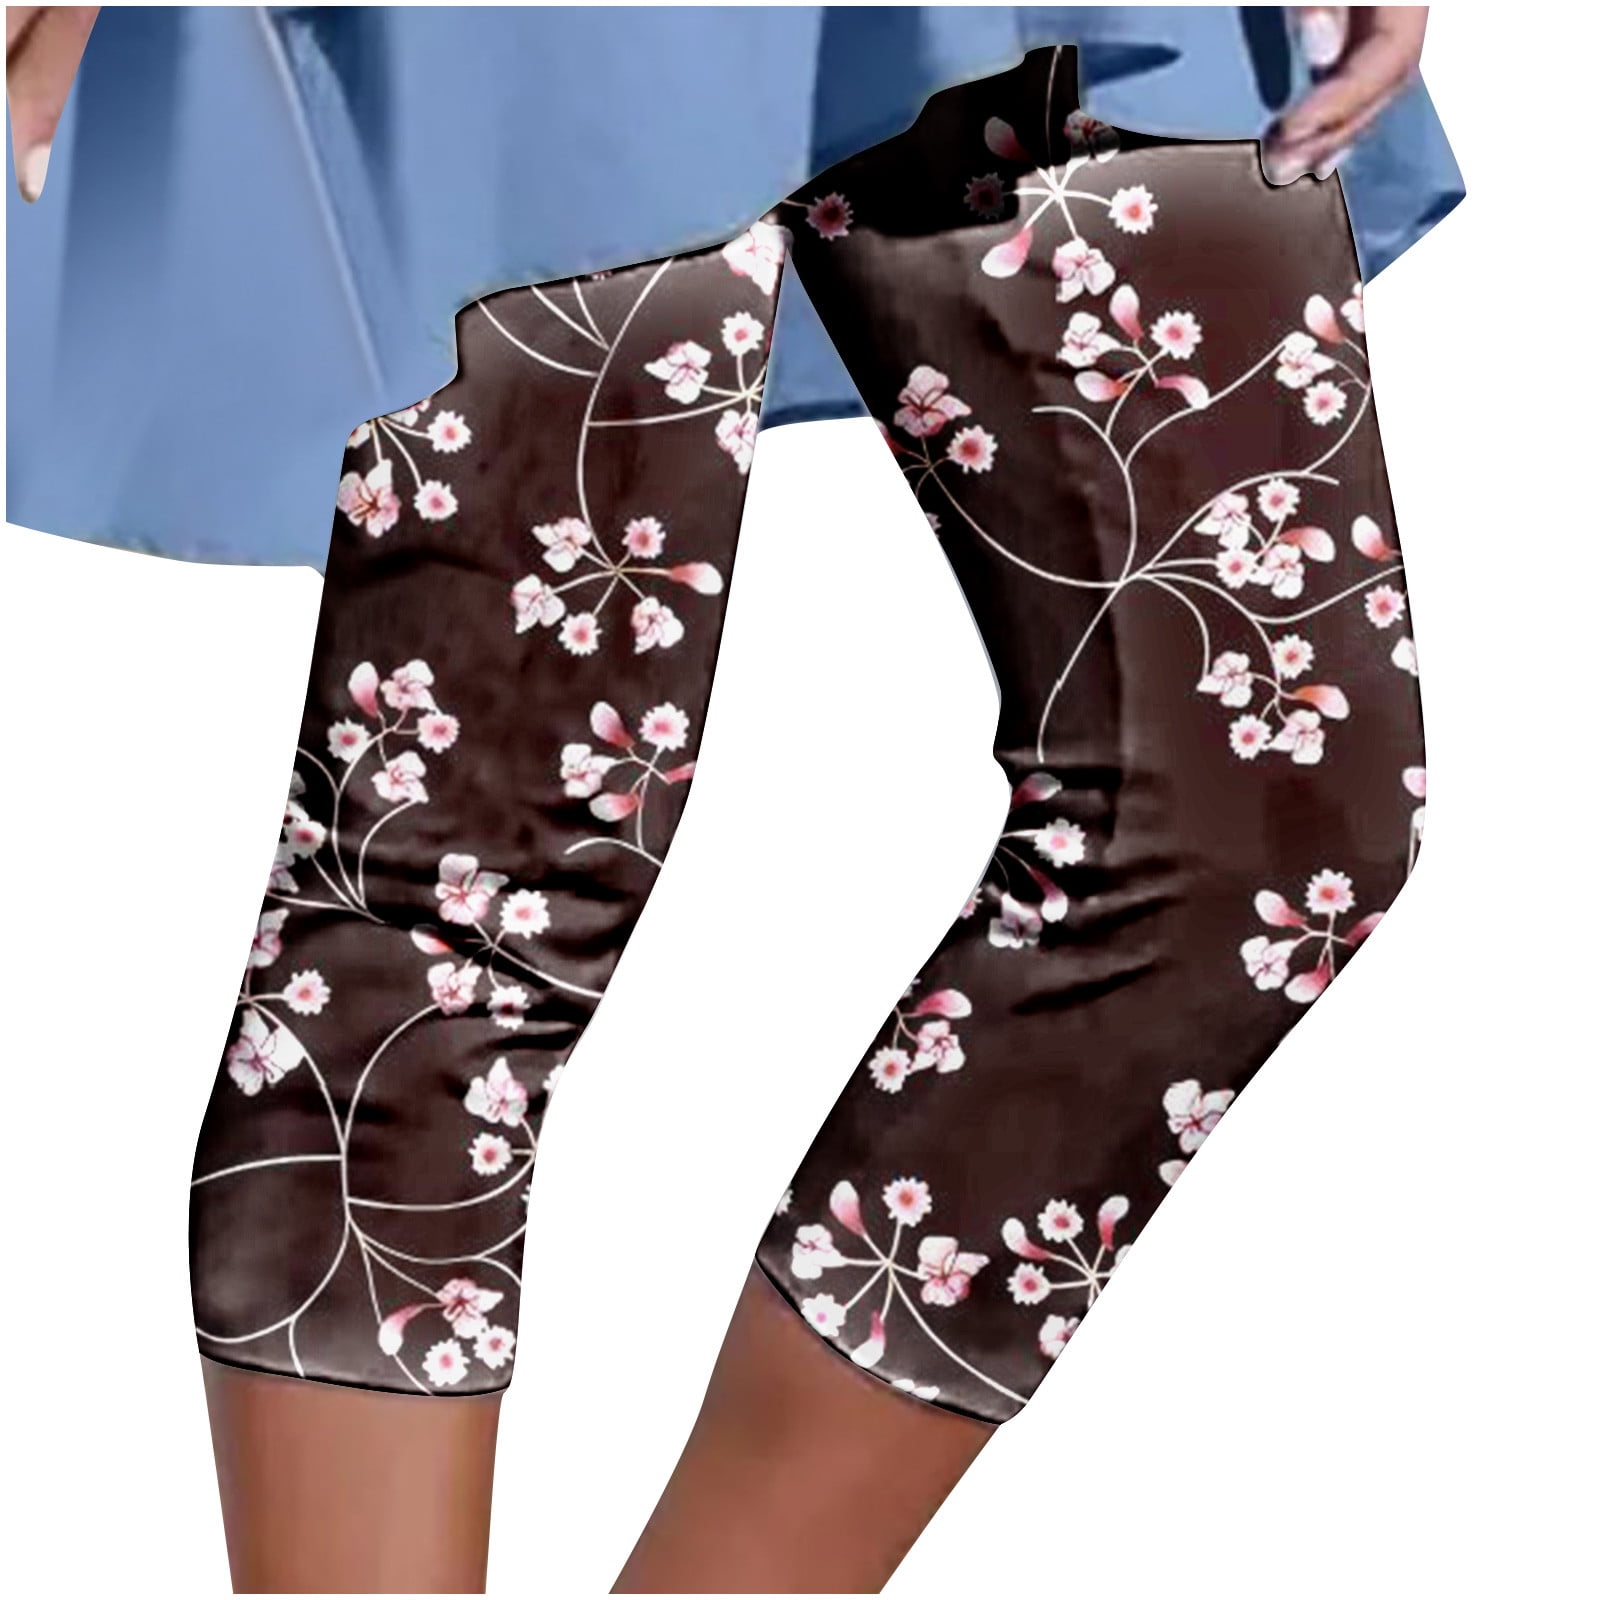 ZKCCNUK Summer Plus Size Capris for Women Summer Casual Elastic Waist  Printed Cropped Pants Trousers for Women on Clearance 